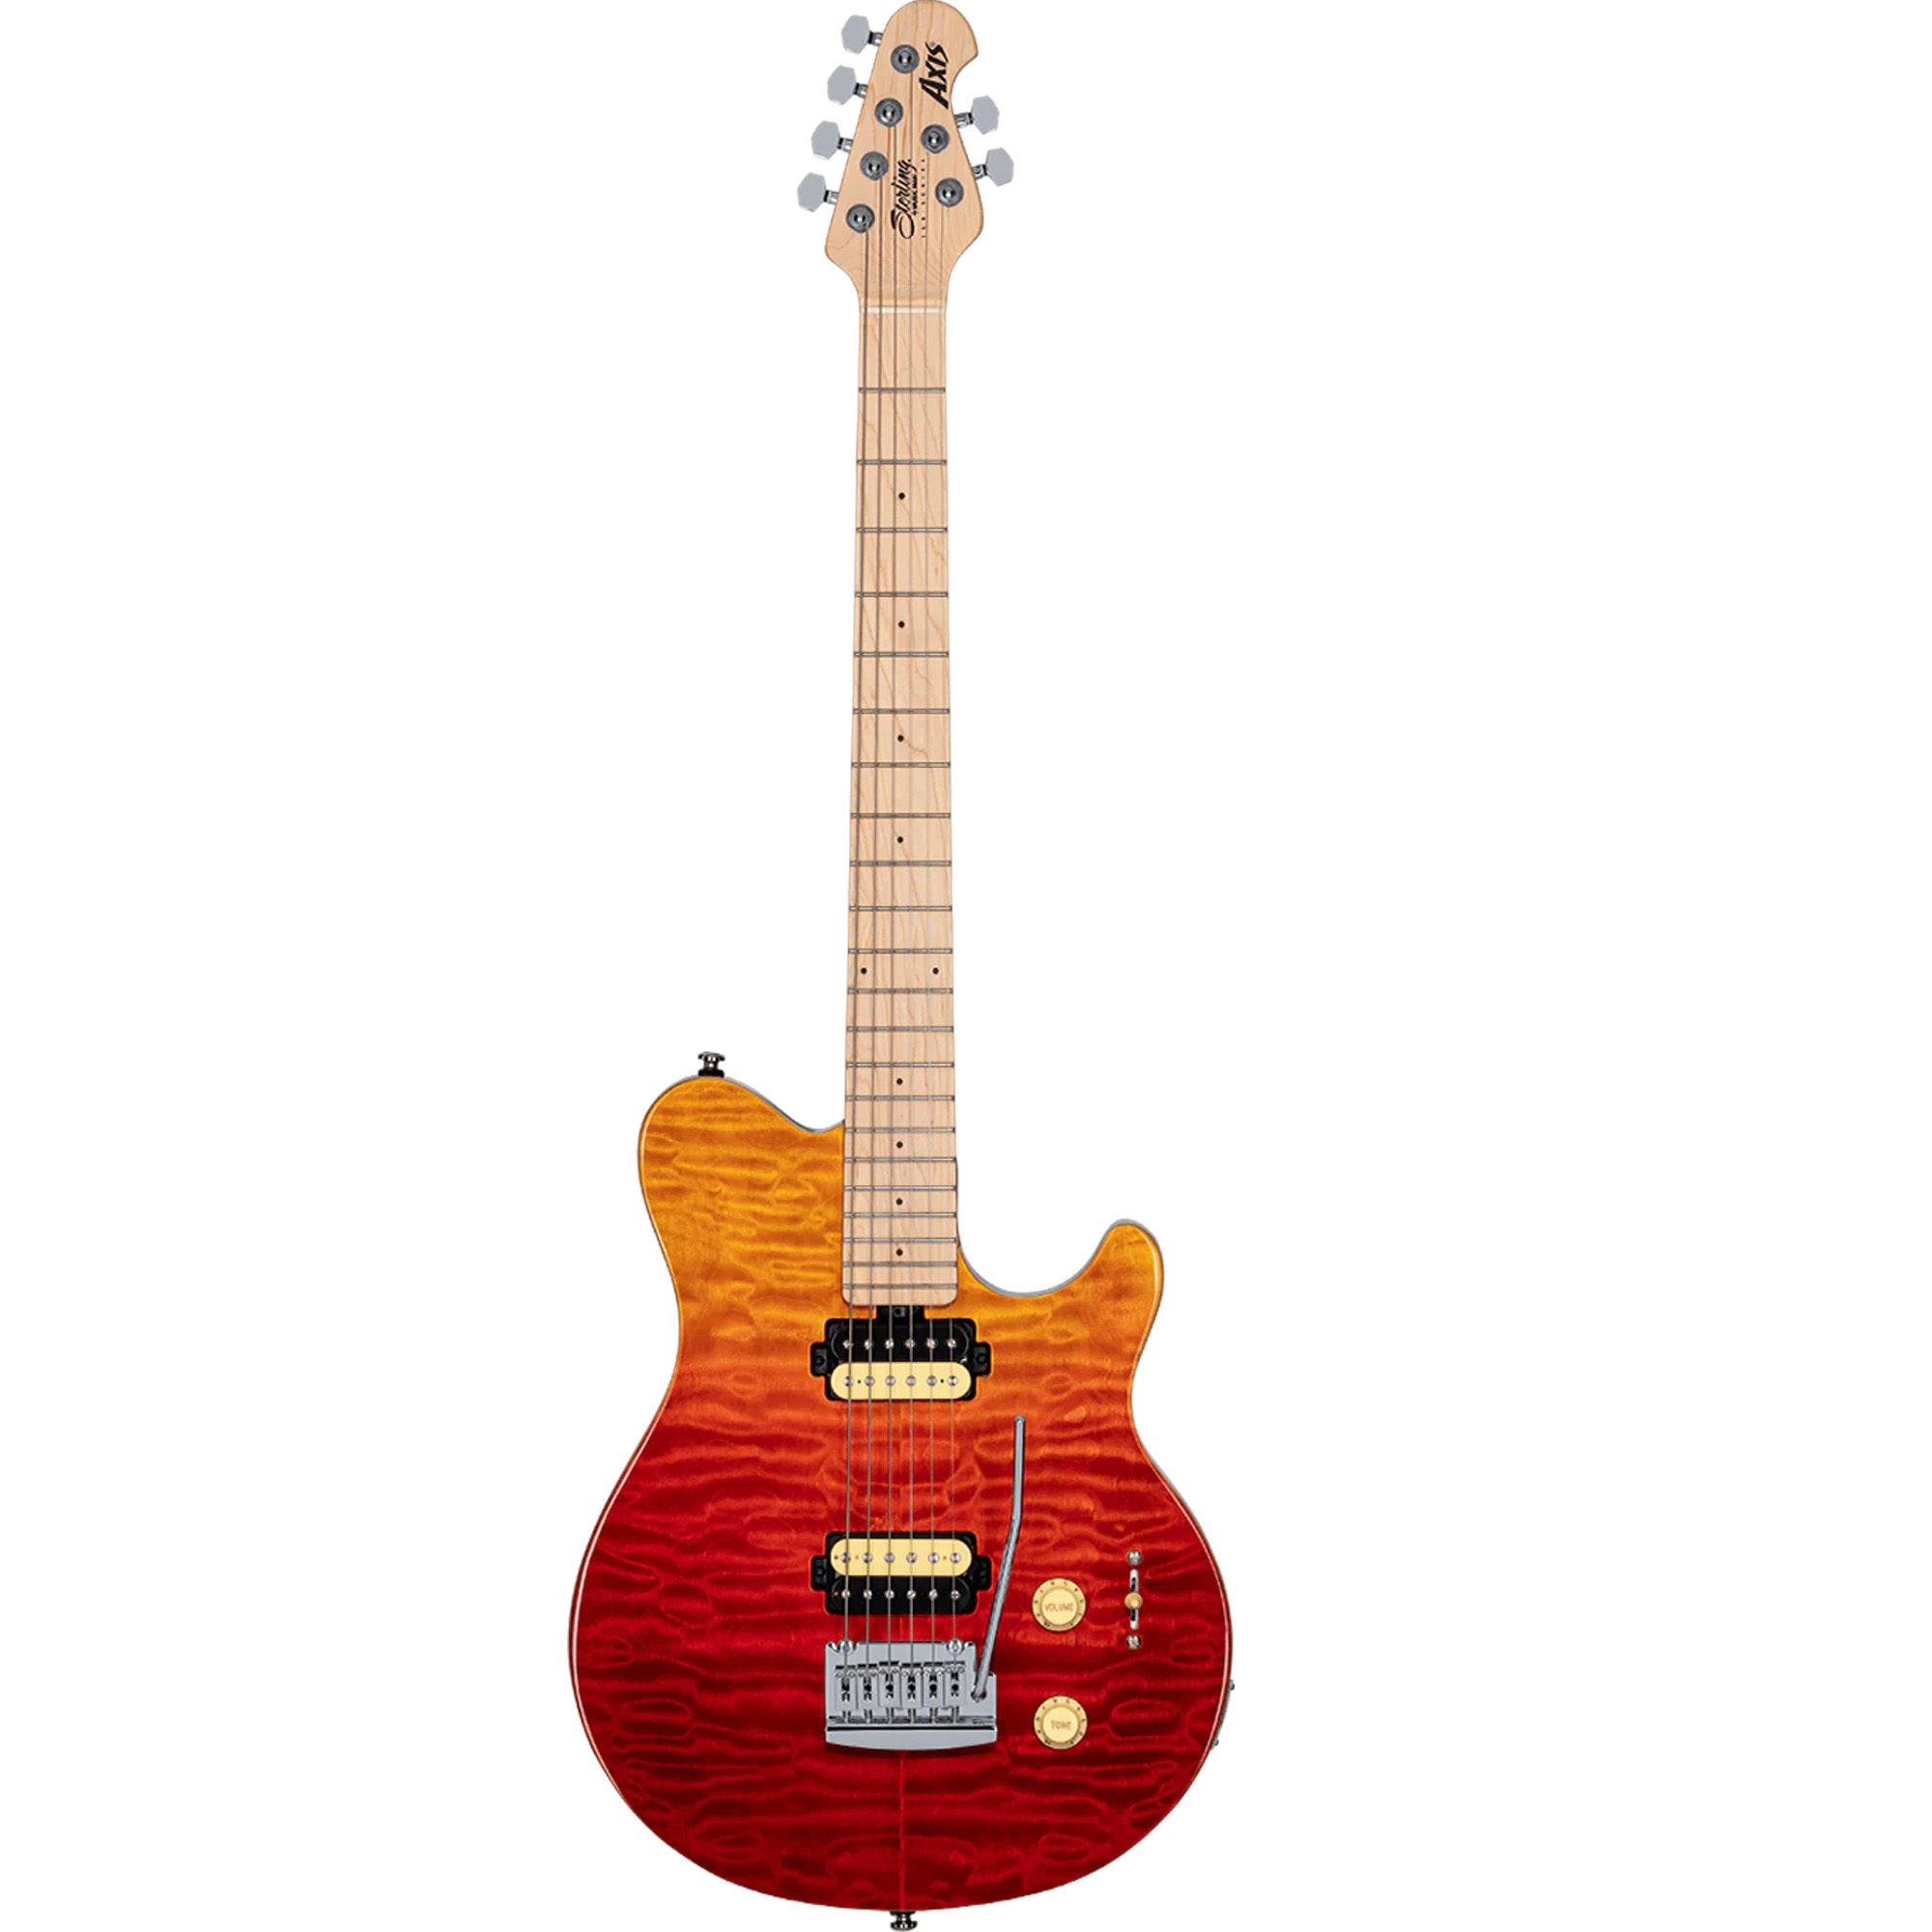 Sterling by Music Man Axis AX3 Quilted Maple Guitar - Spectrum Red